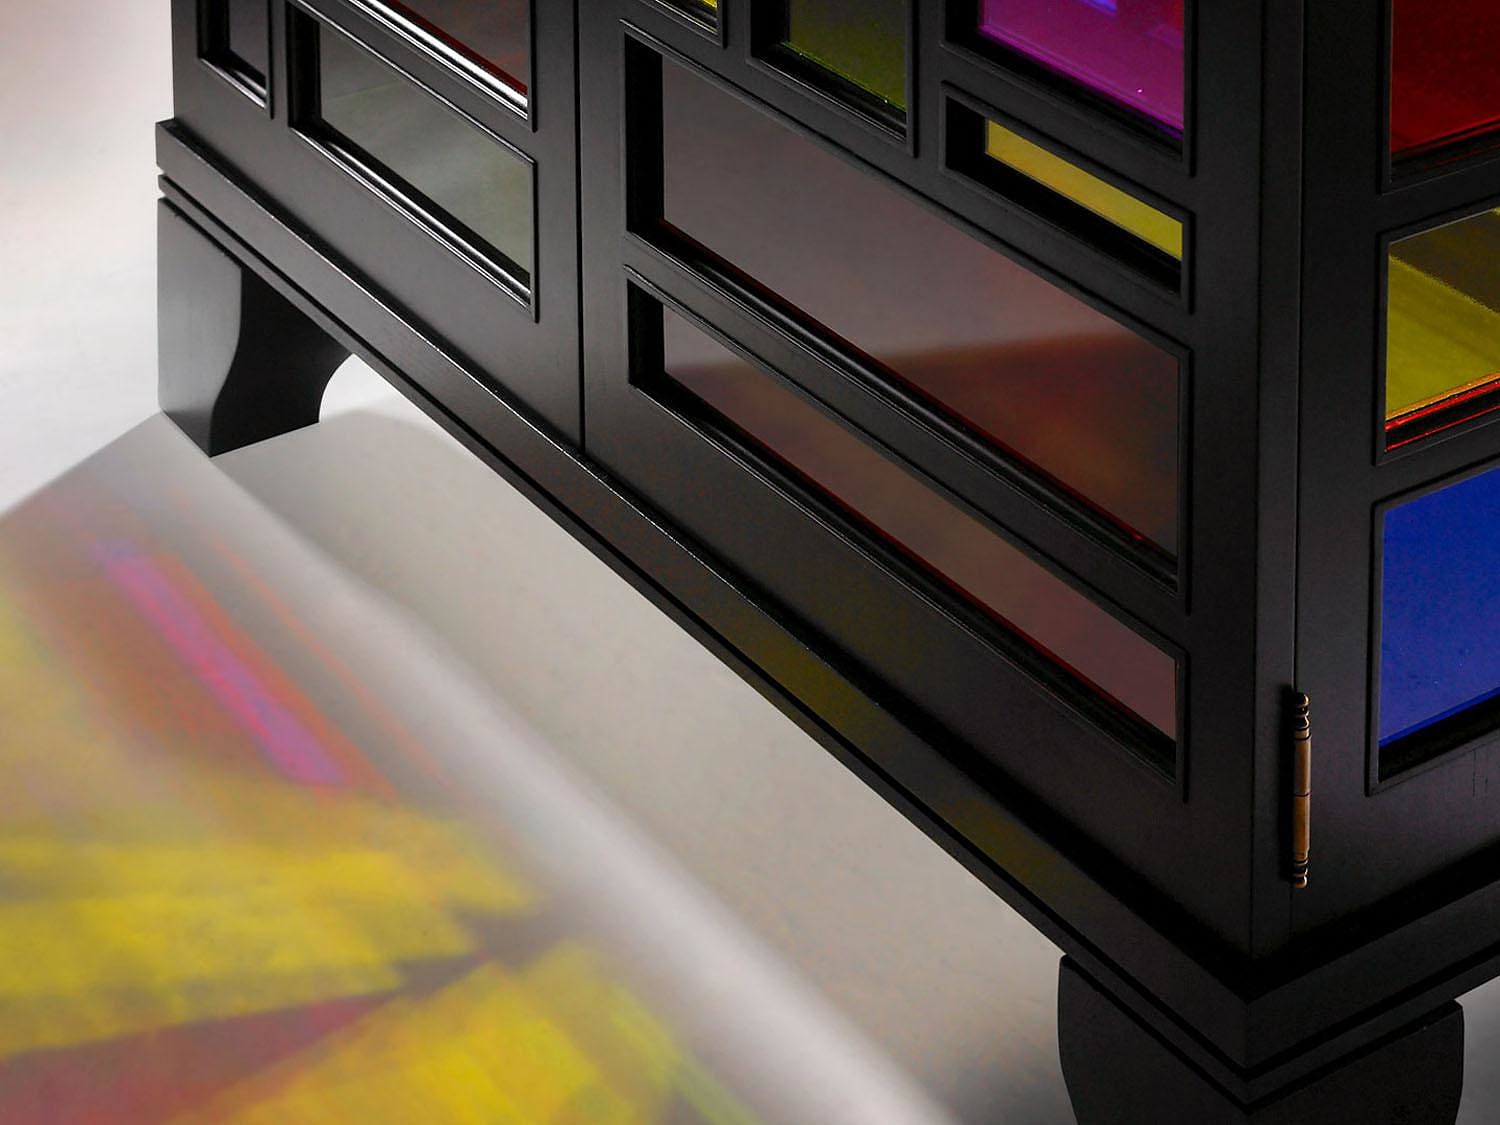 Rainbow Cabinet by Tusse.